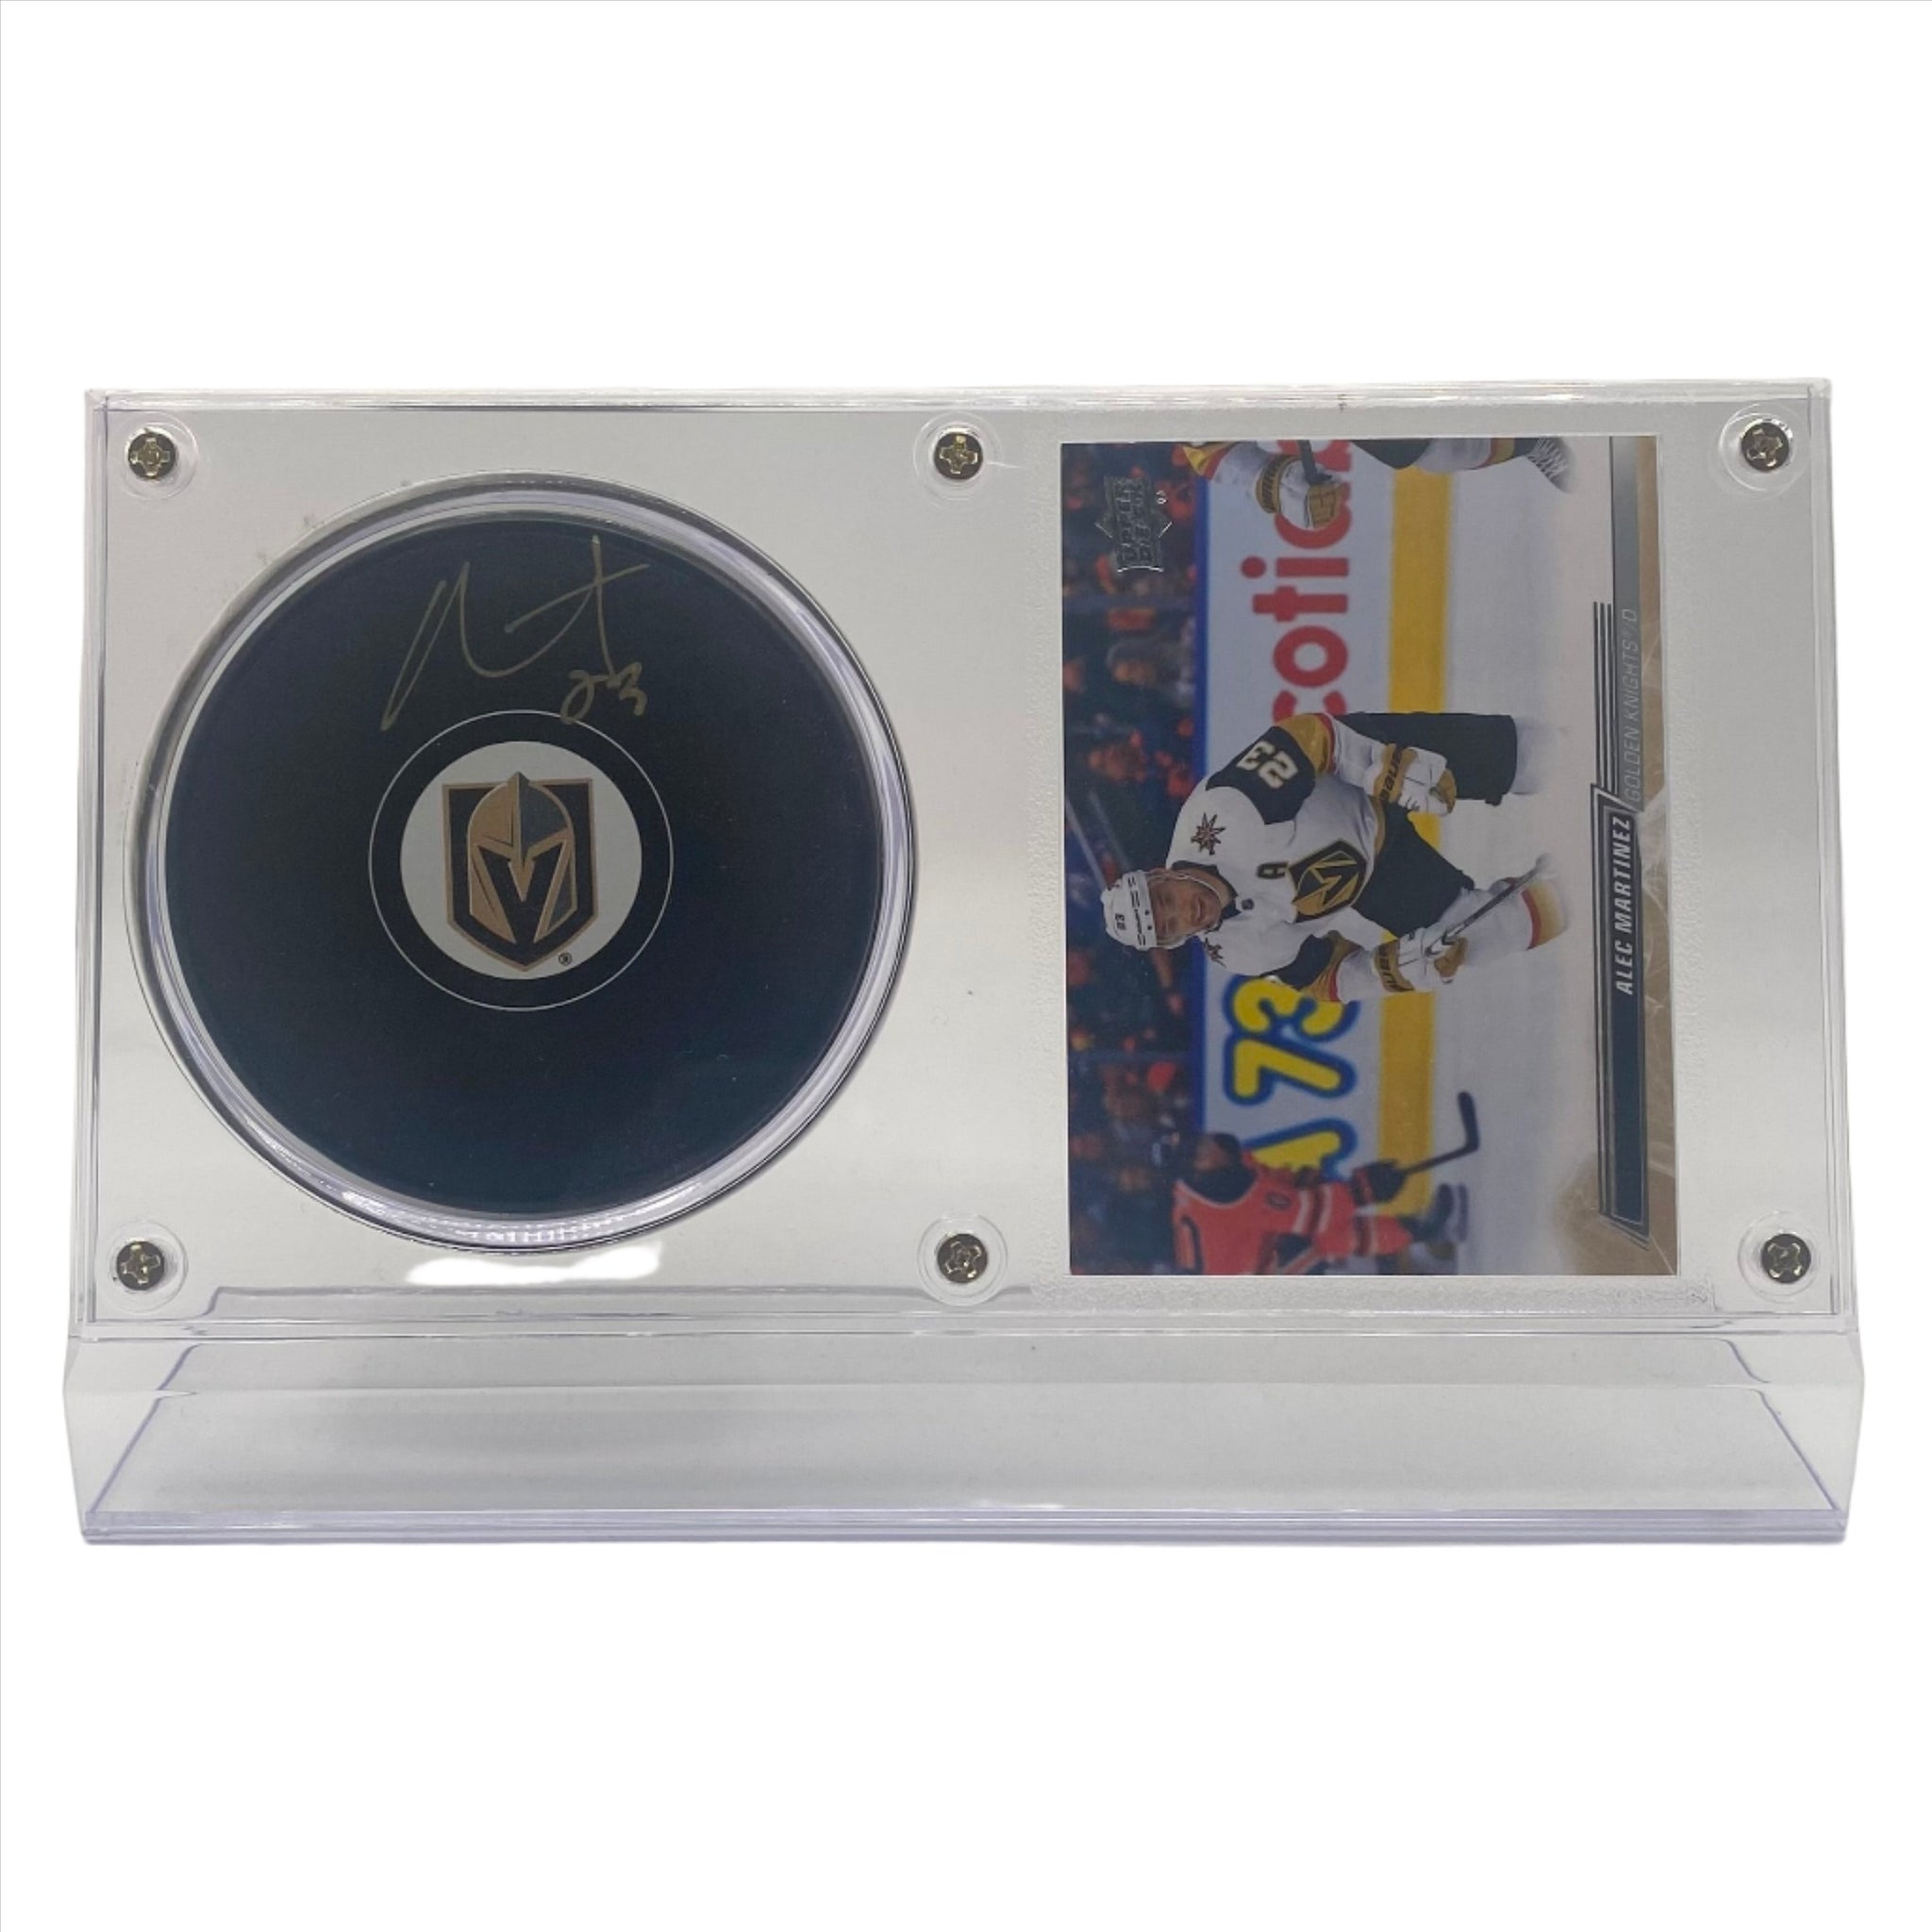 Alec Martinez Vegas Golden Knights Autographed Hockey Puck and Trading Card Case